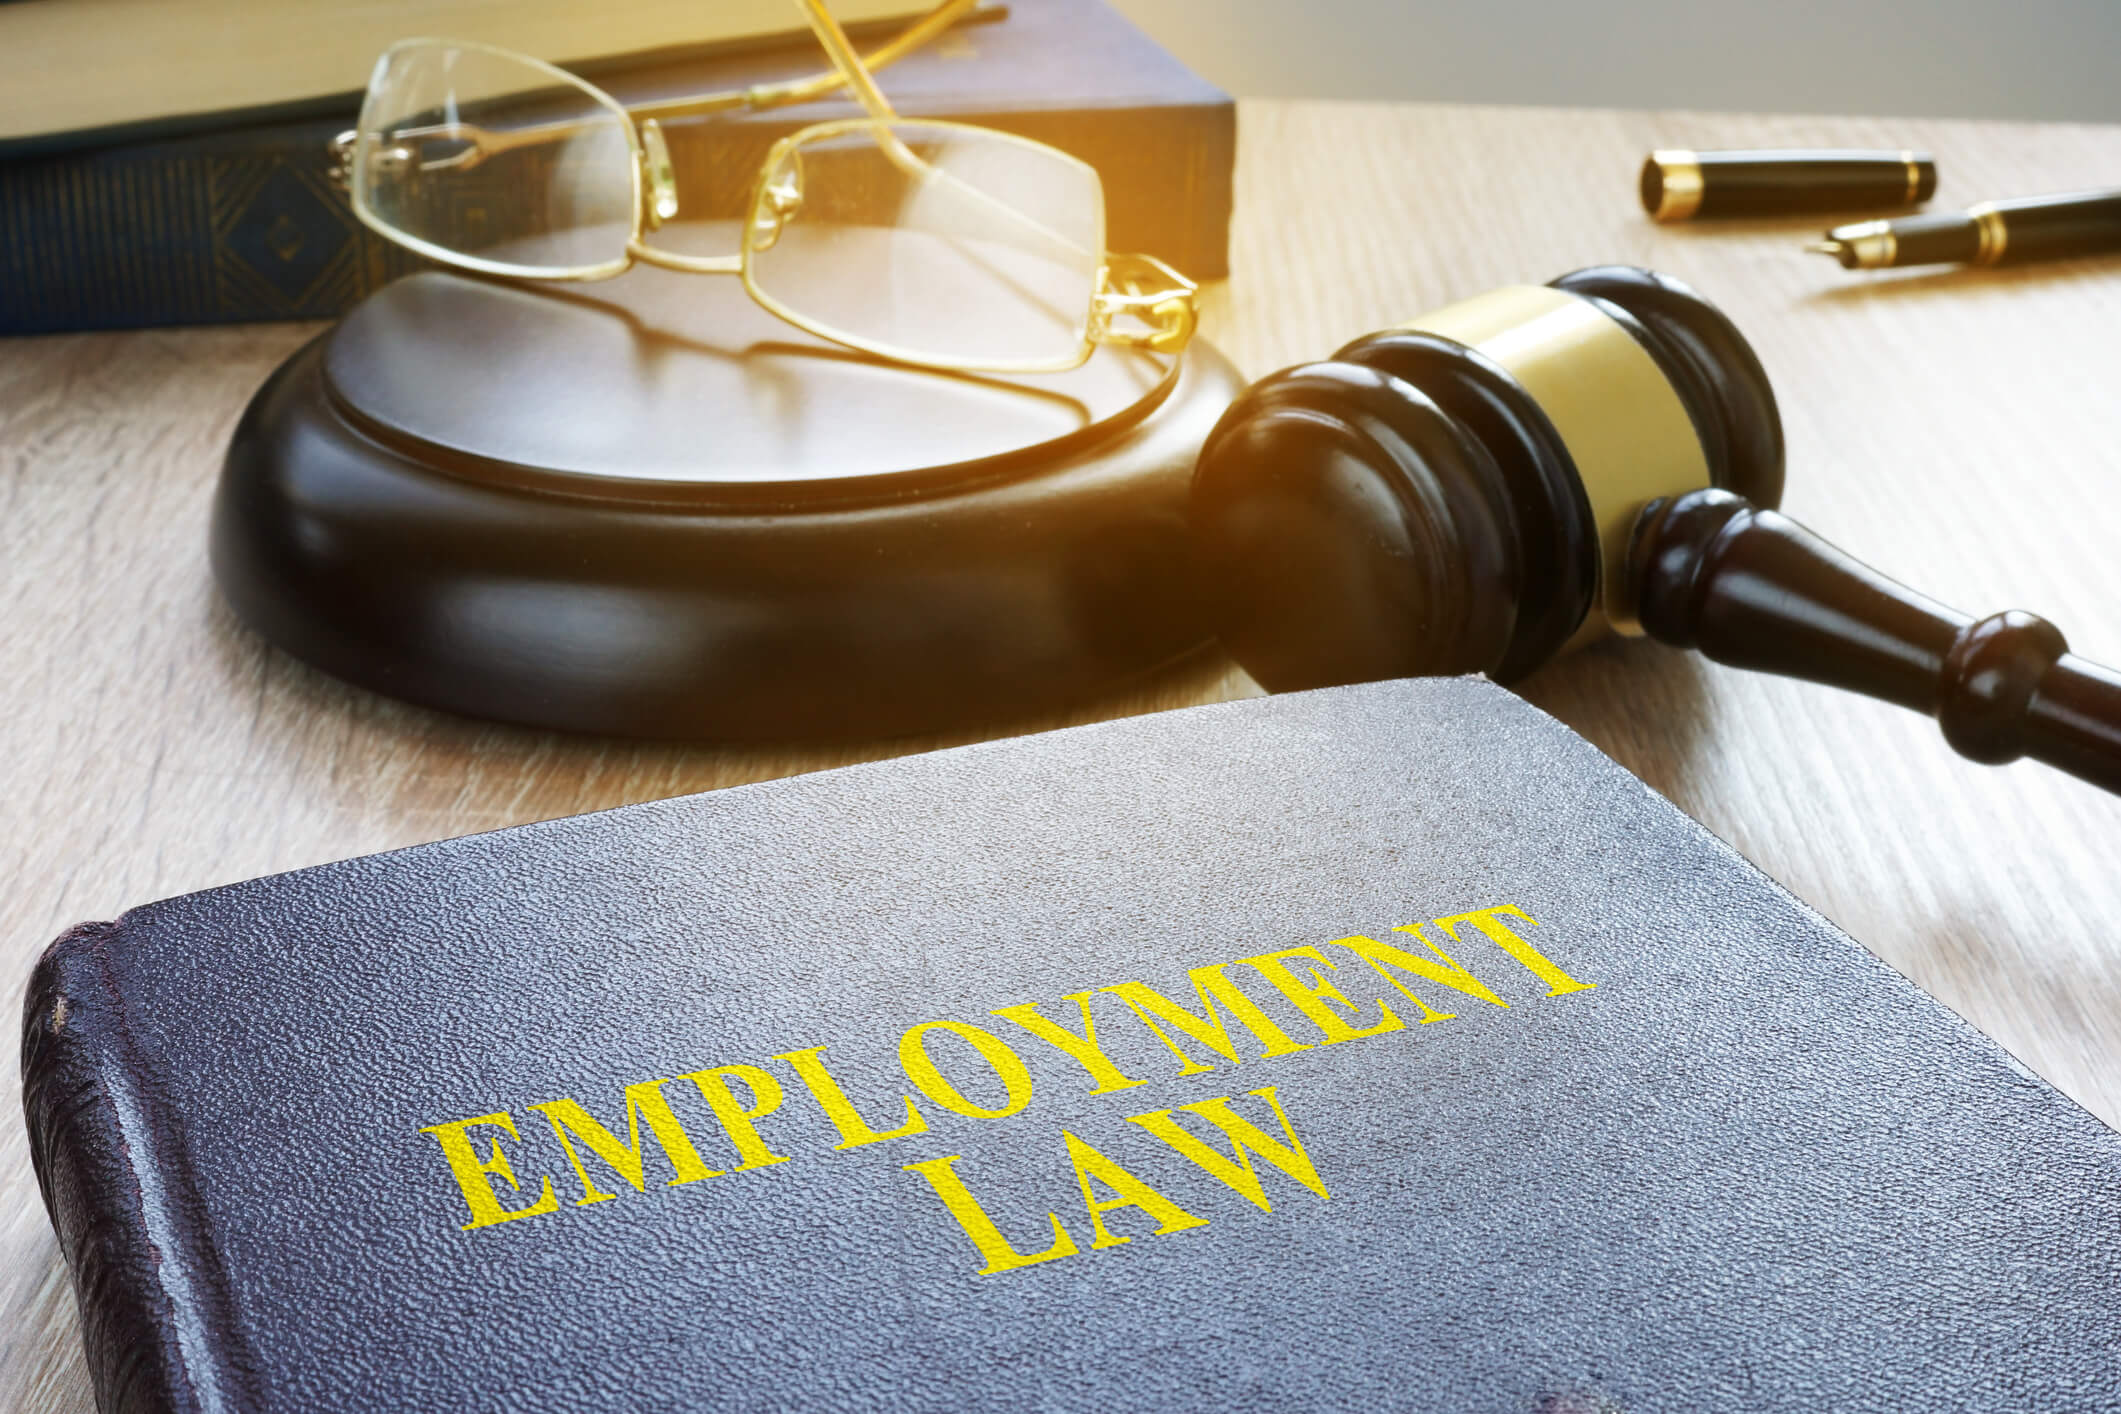 Labor Laws: What Are My Rights in The Workplace?